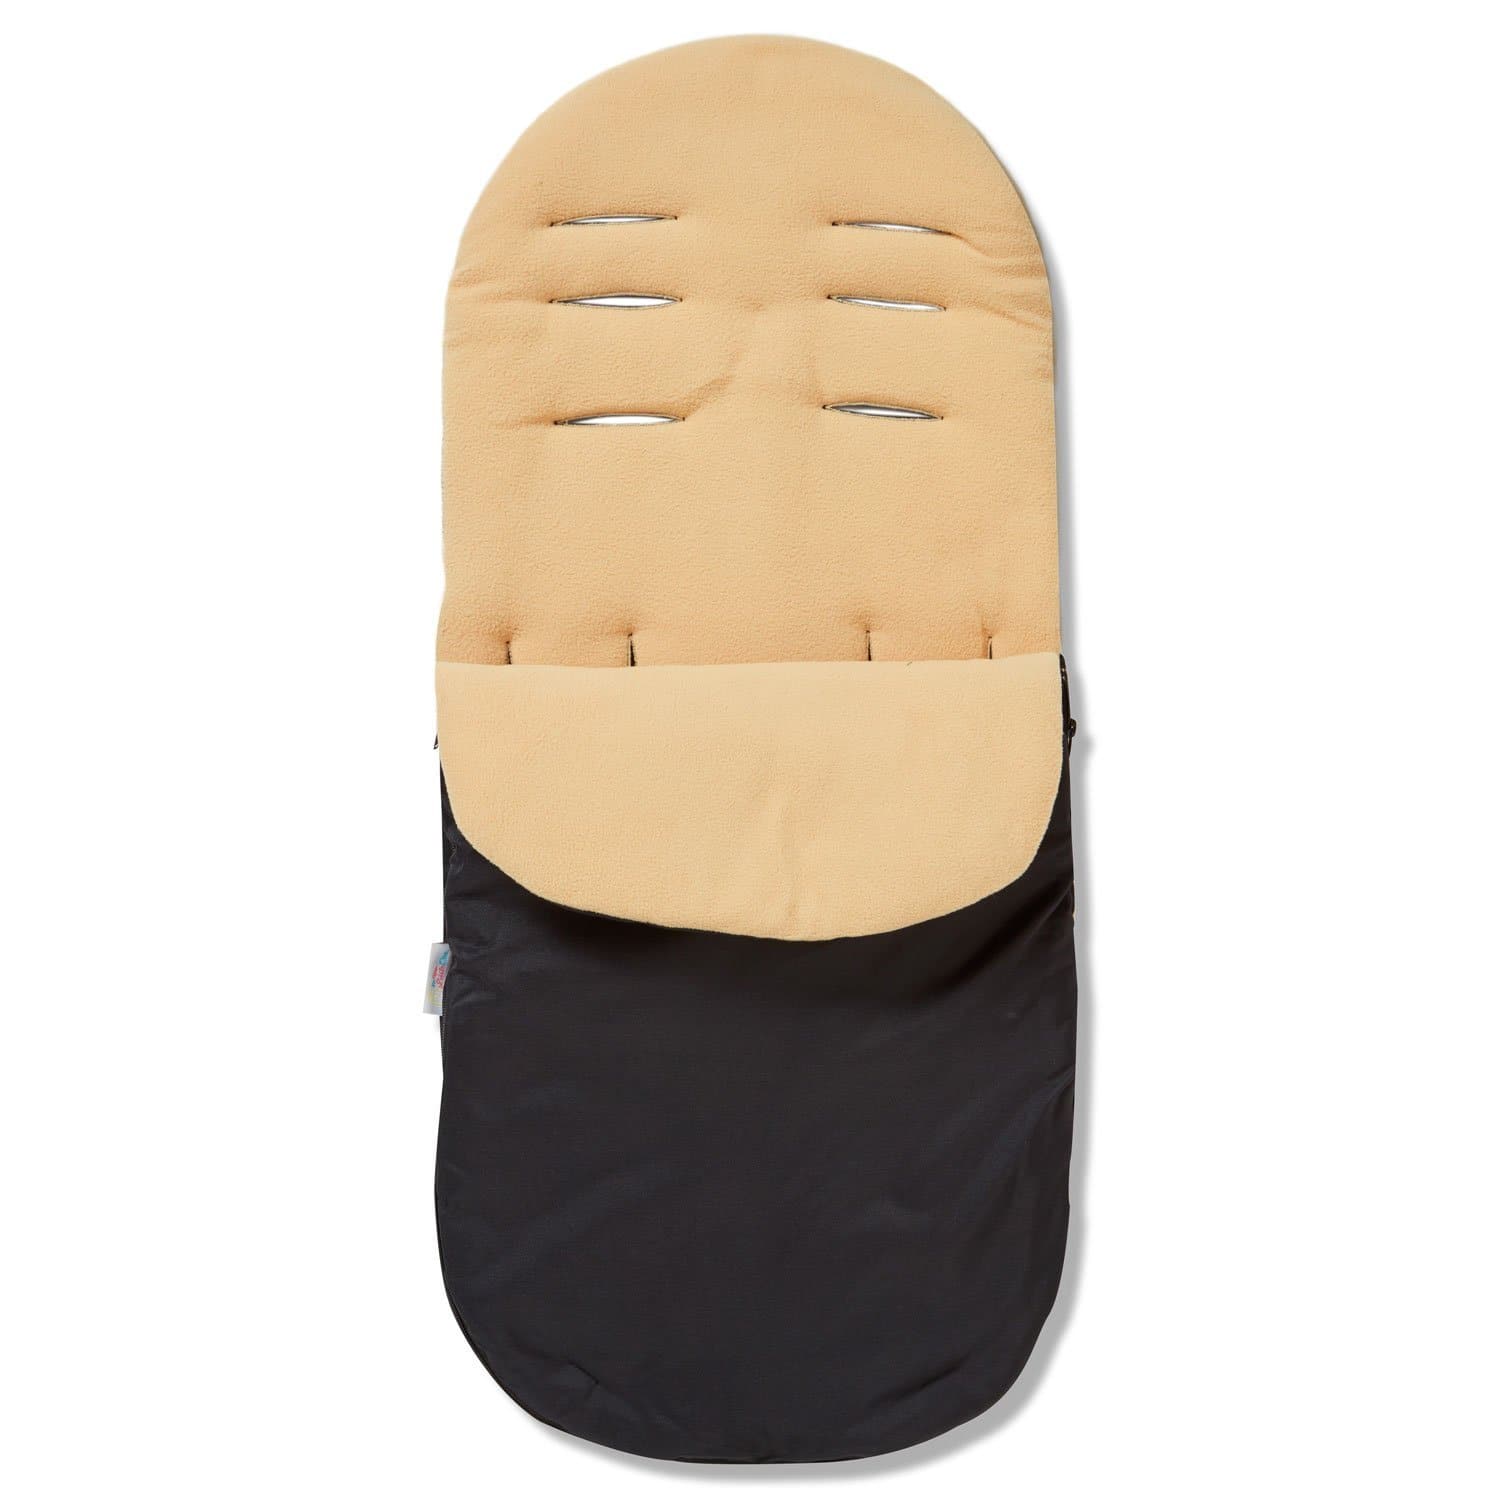 Footmuff / Cosy Toes Compatible with Diono - Sand / Fits All Models | For Your Little One